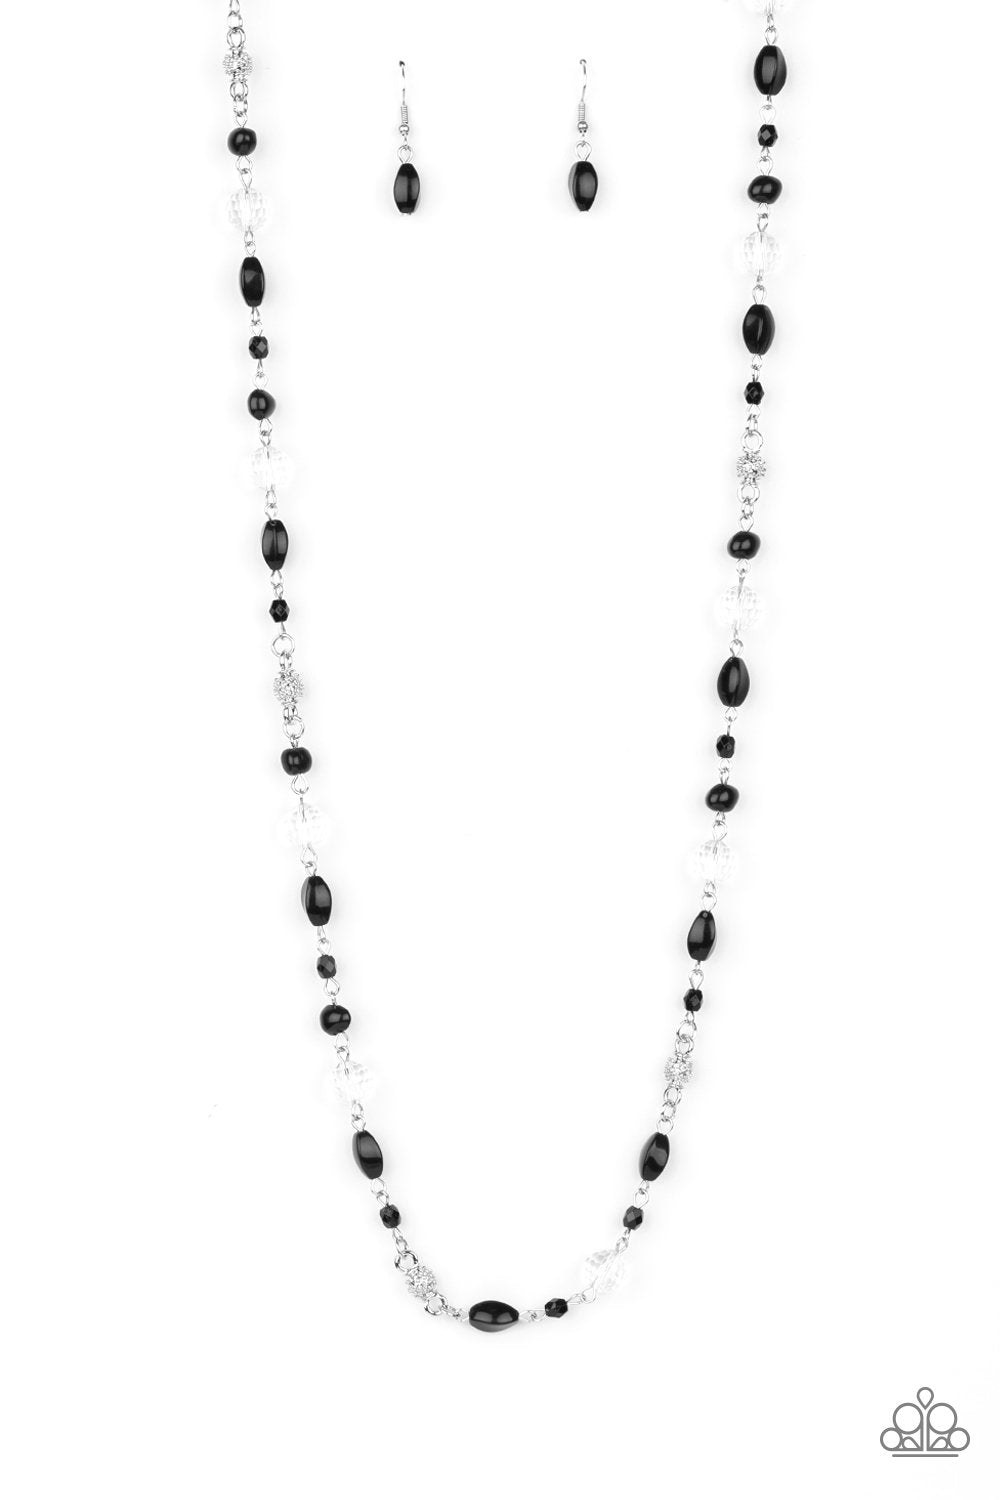 Twinkling Treasures Black and White Necklace - Paparazzi Accessories - lightbox -CarasShop.com - $5 Jewelry by Cara Jewels